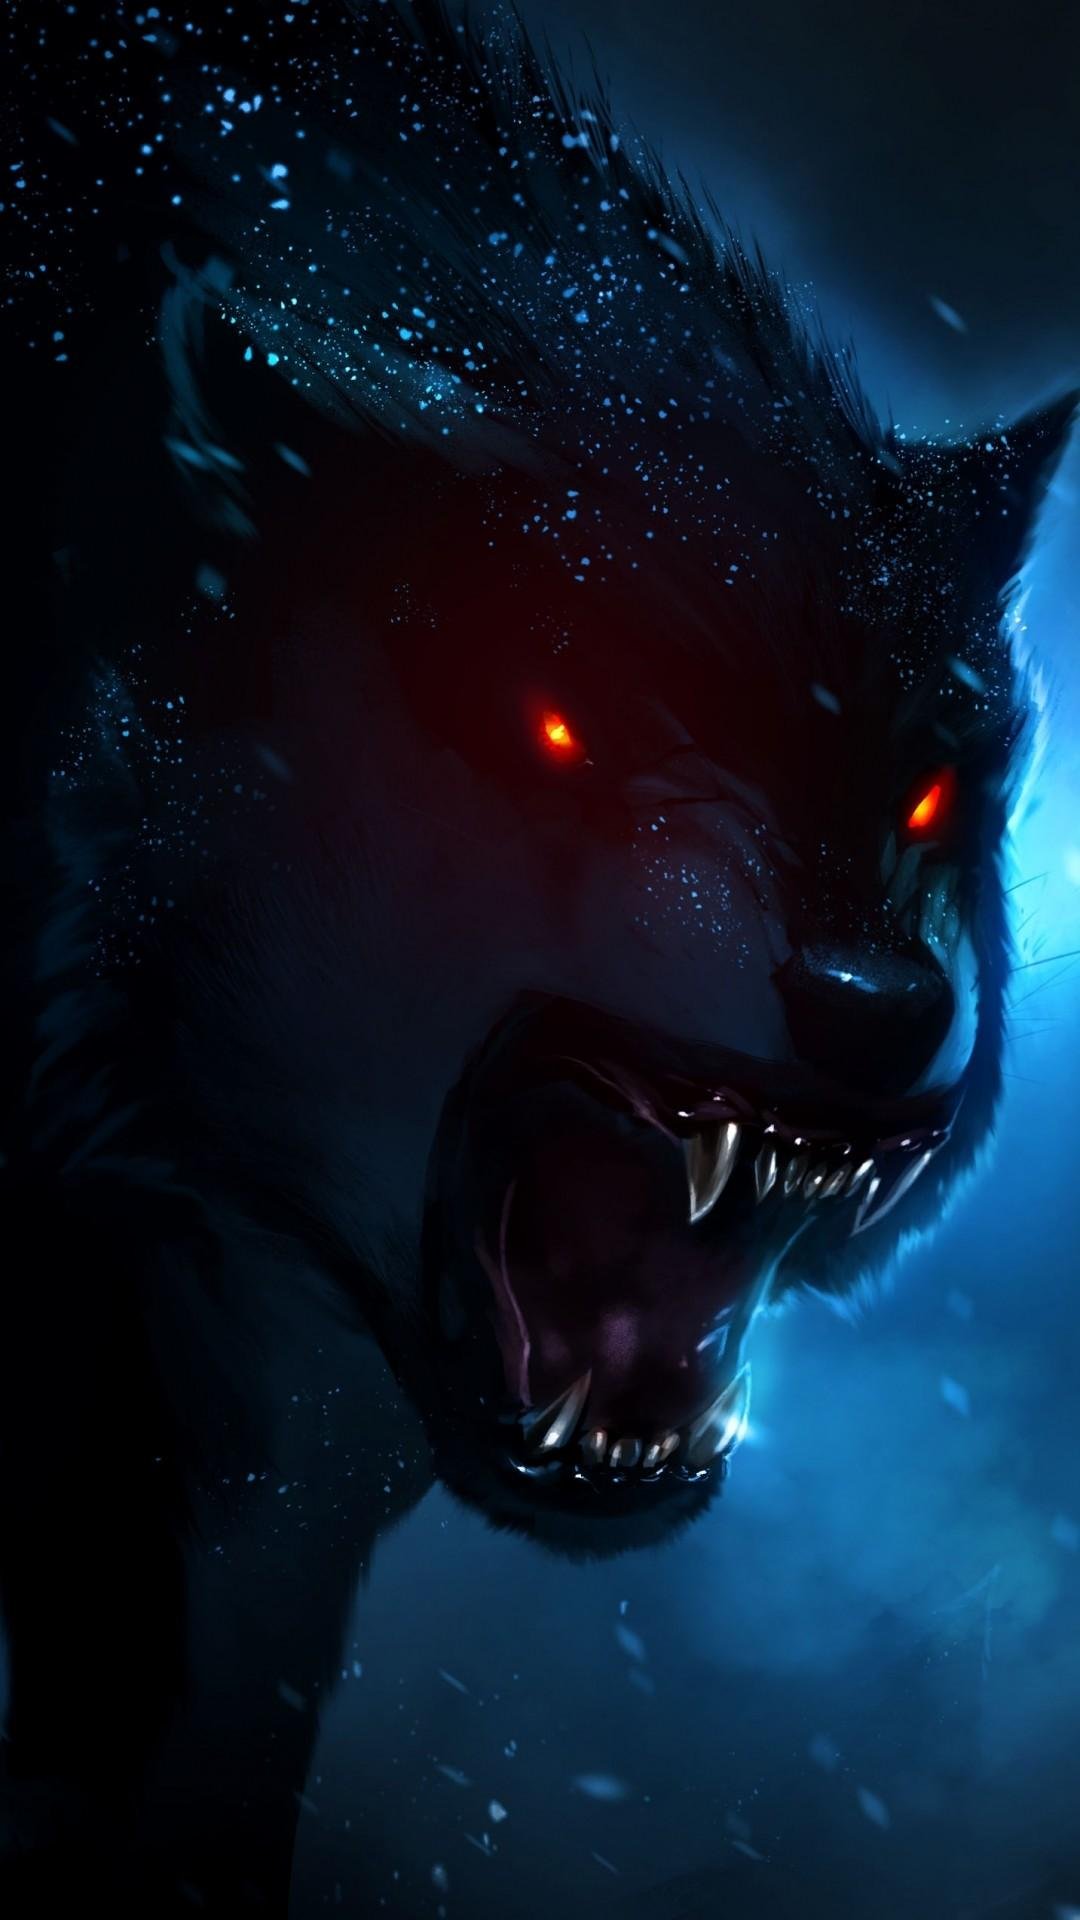 Scary wolf art Wallpapers Download | MobCup